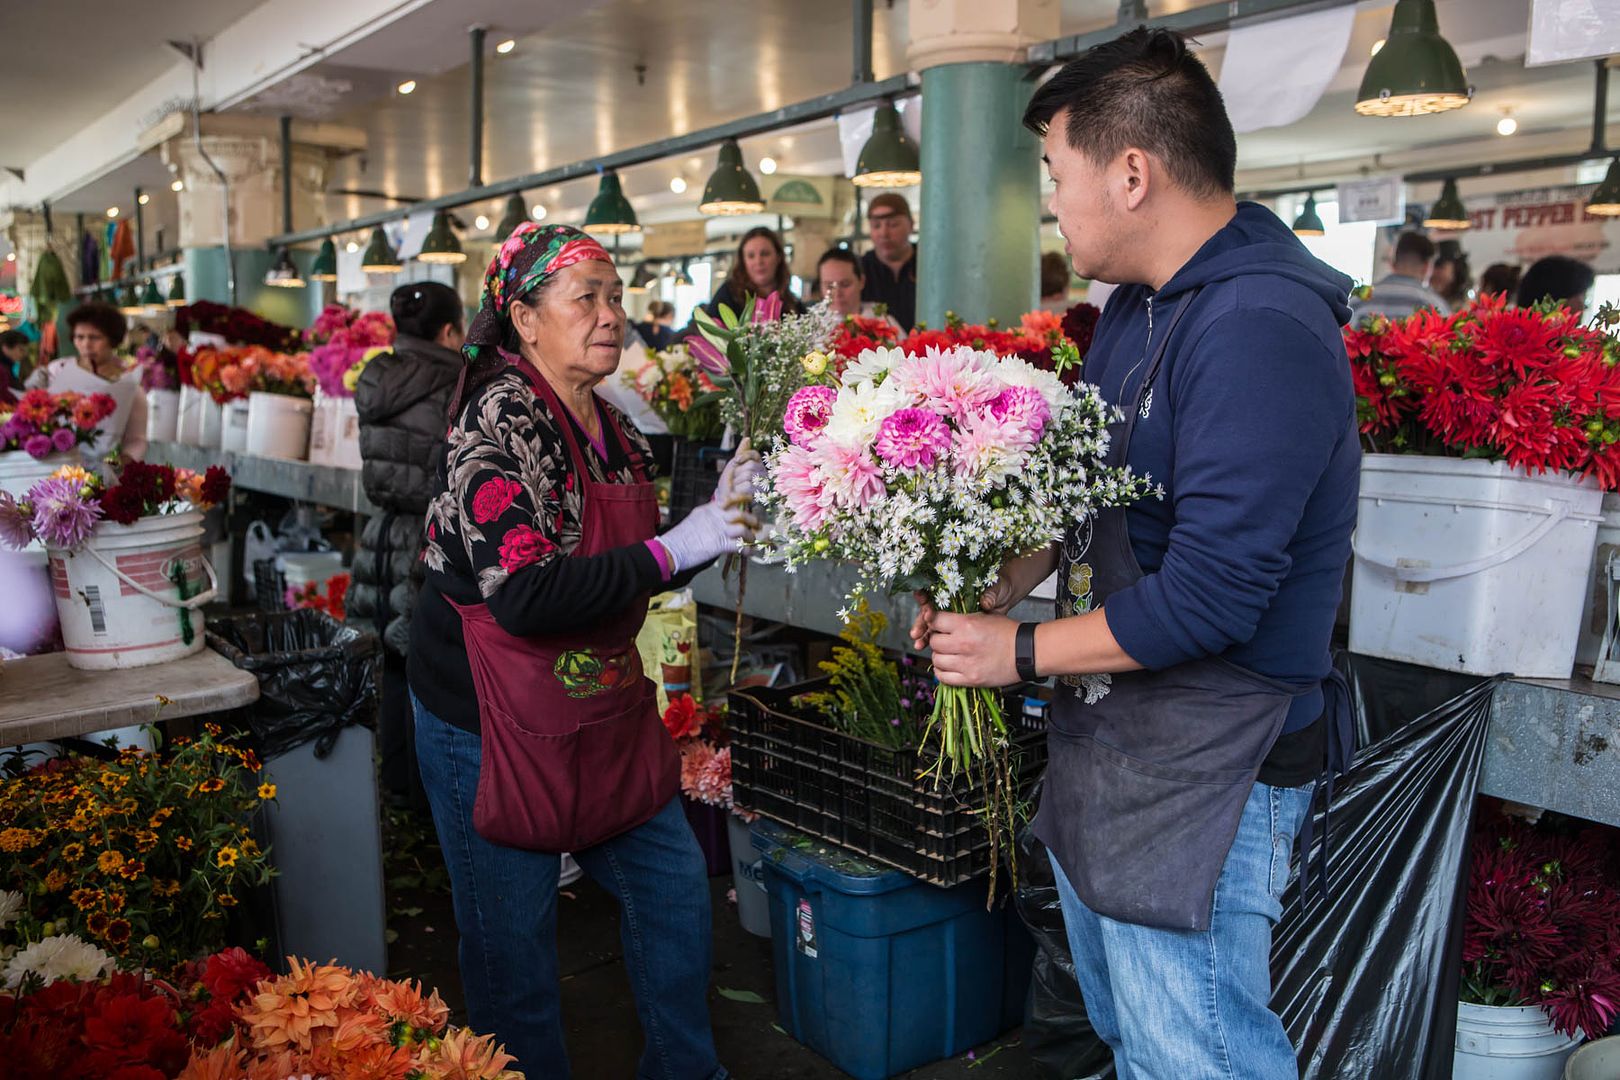 Scott and Chue prepare bouquets in the market photo 170322-sea-advert-ppmf3_zpsm0acisl2.jpg